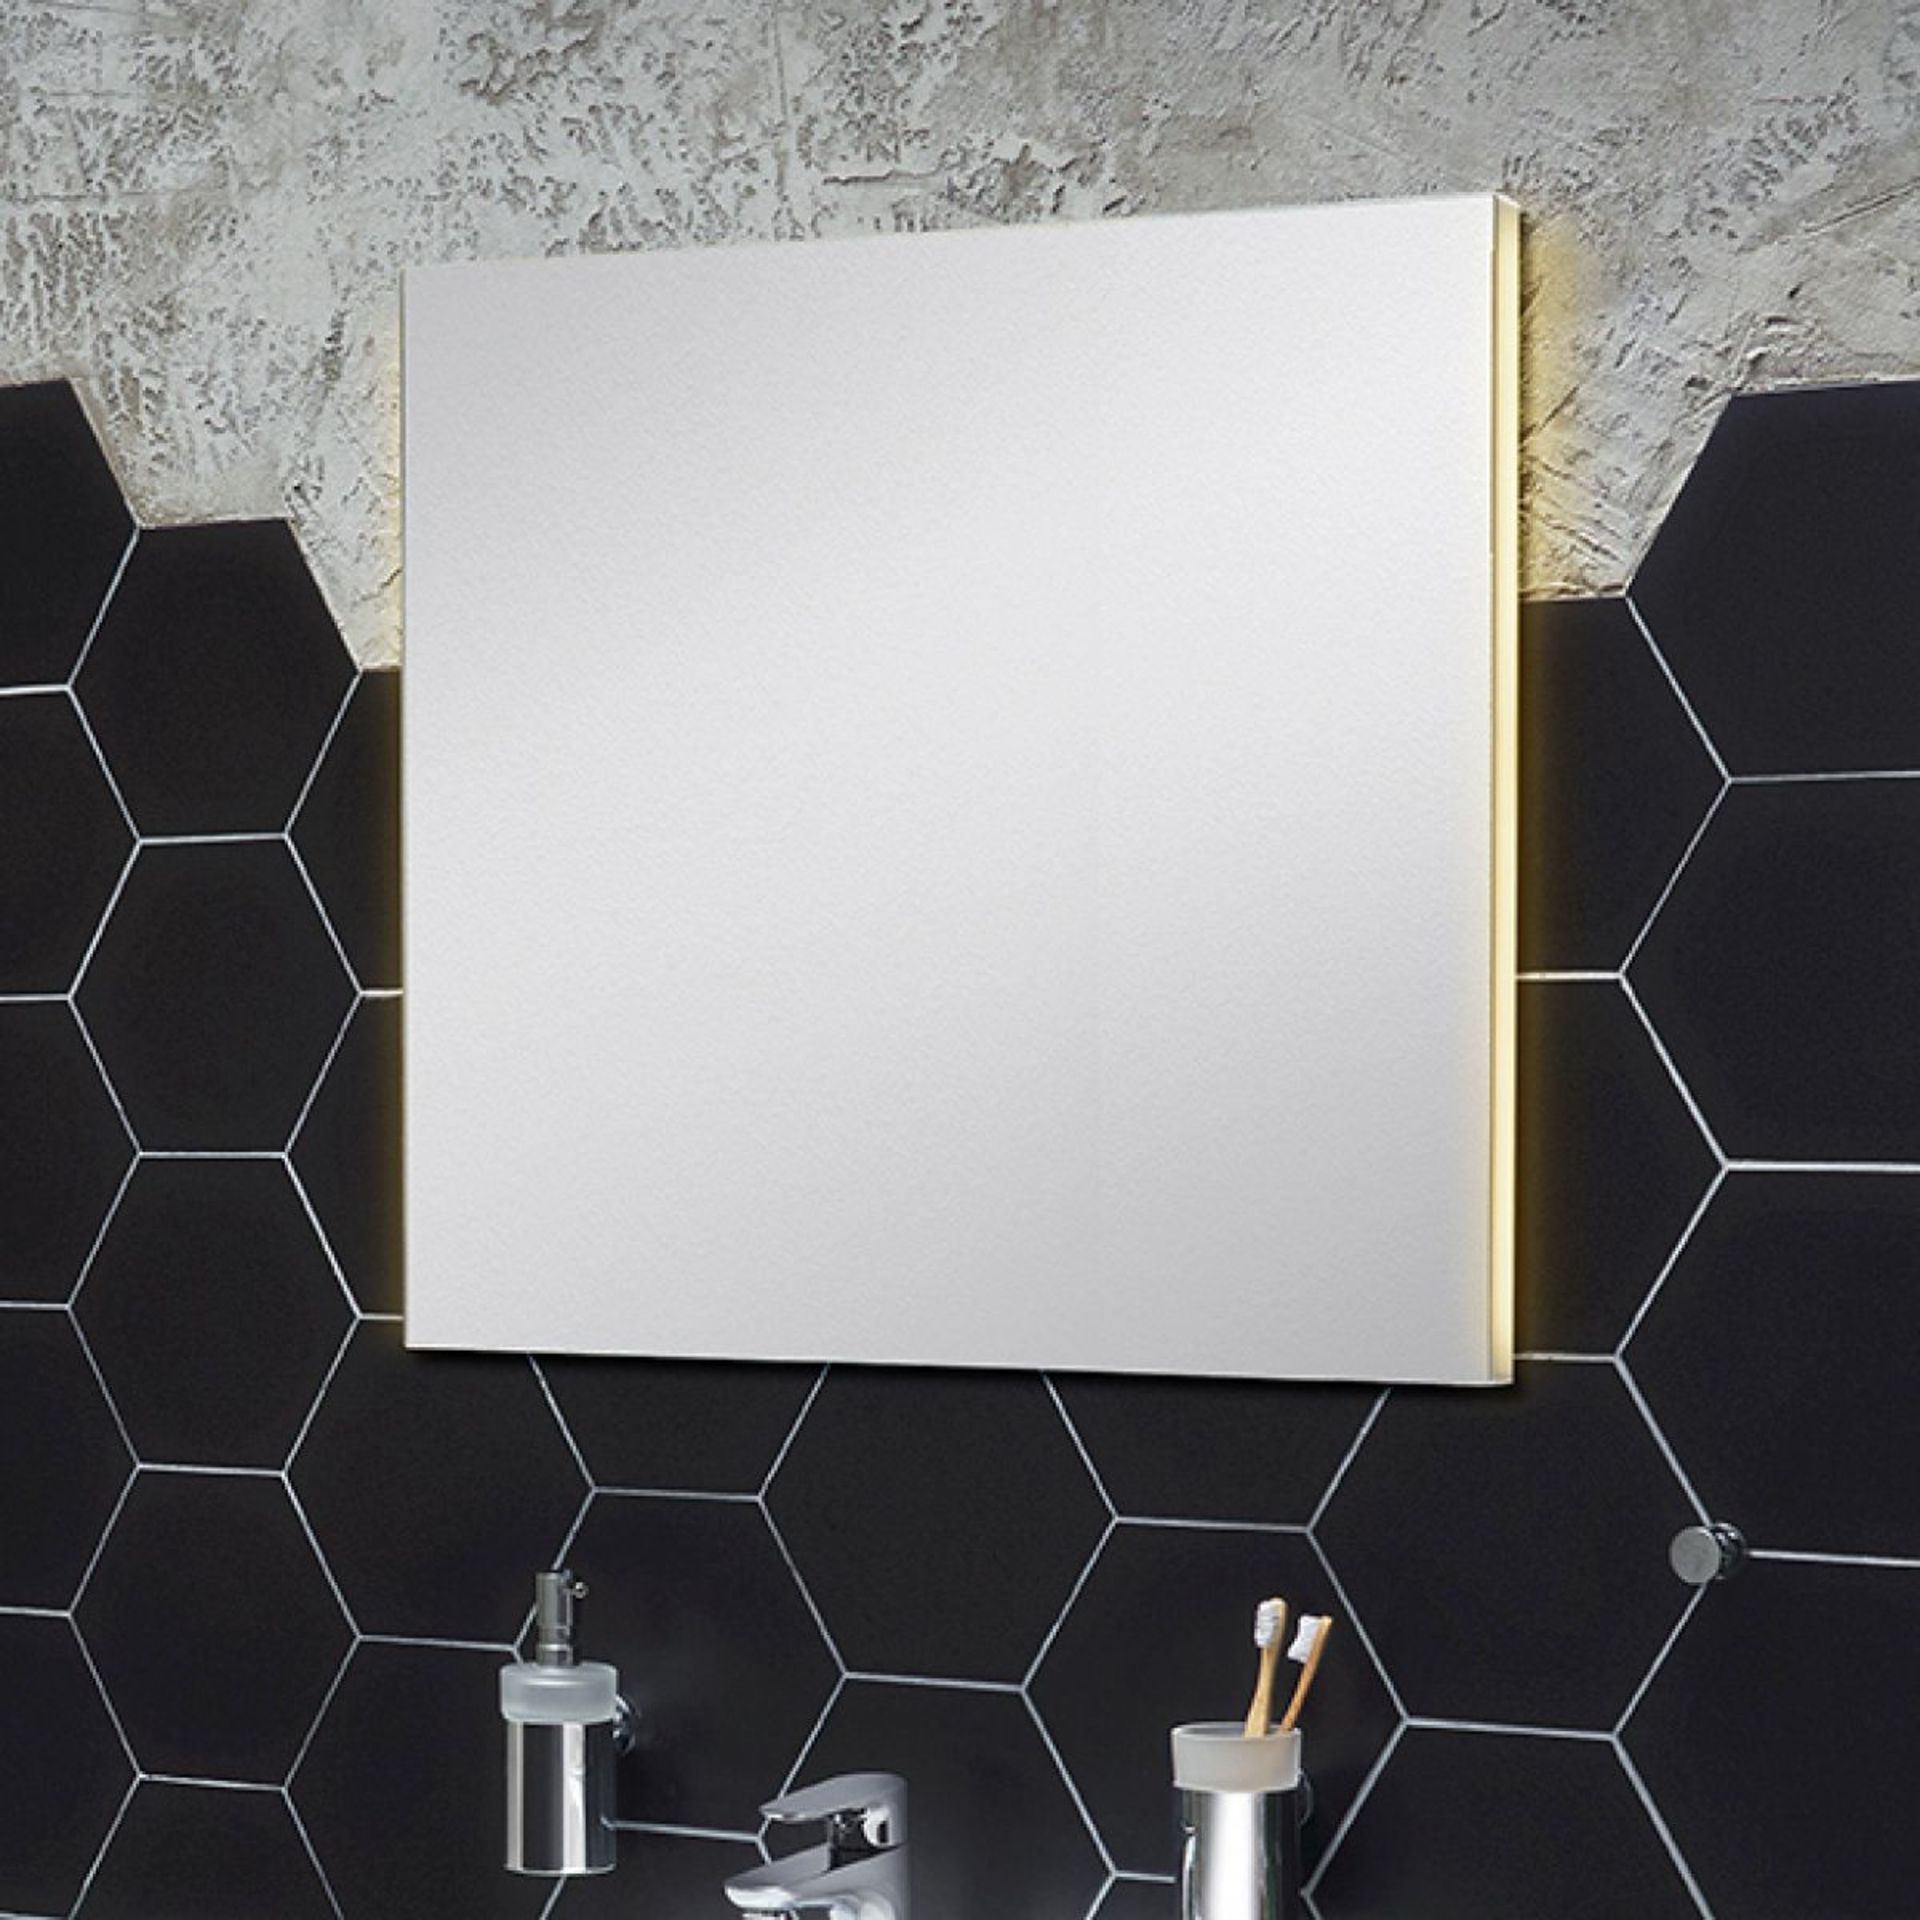 1 x VitrA Brite Illuminated 80cm Bathroom Mirror With On/Off Touch Control - New - RRP £230